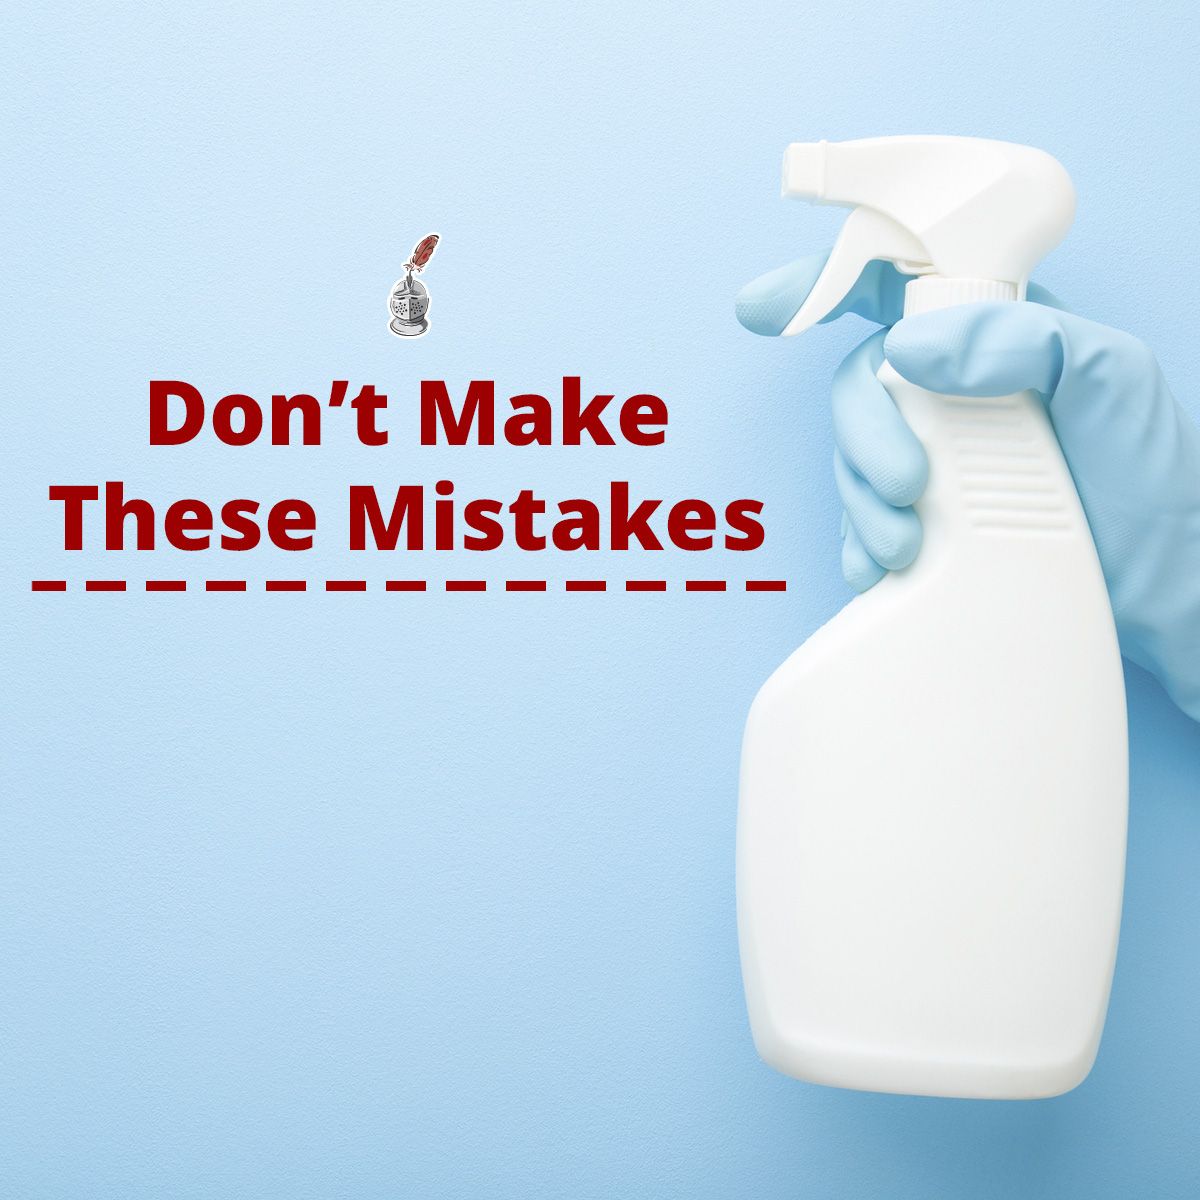 Don't Make These Mistakes